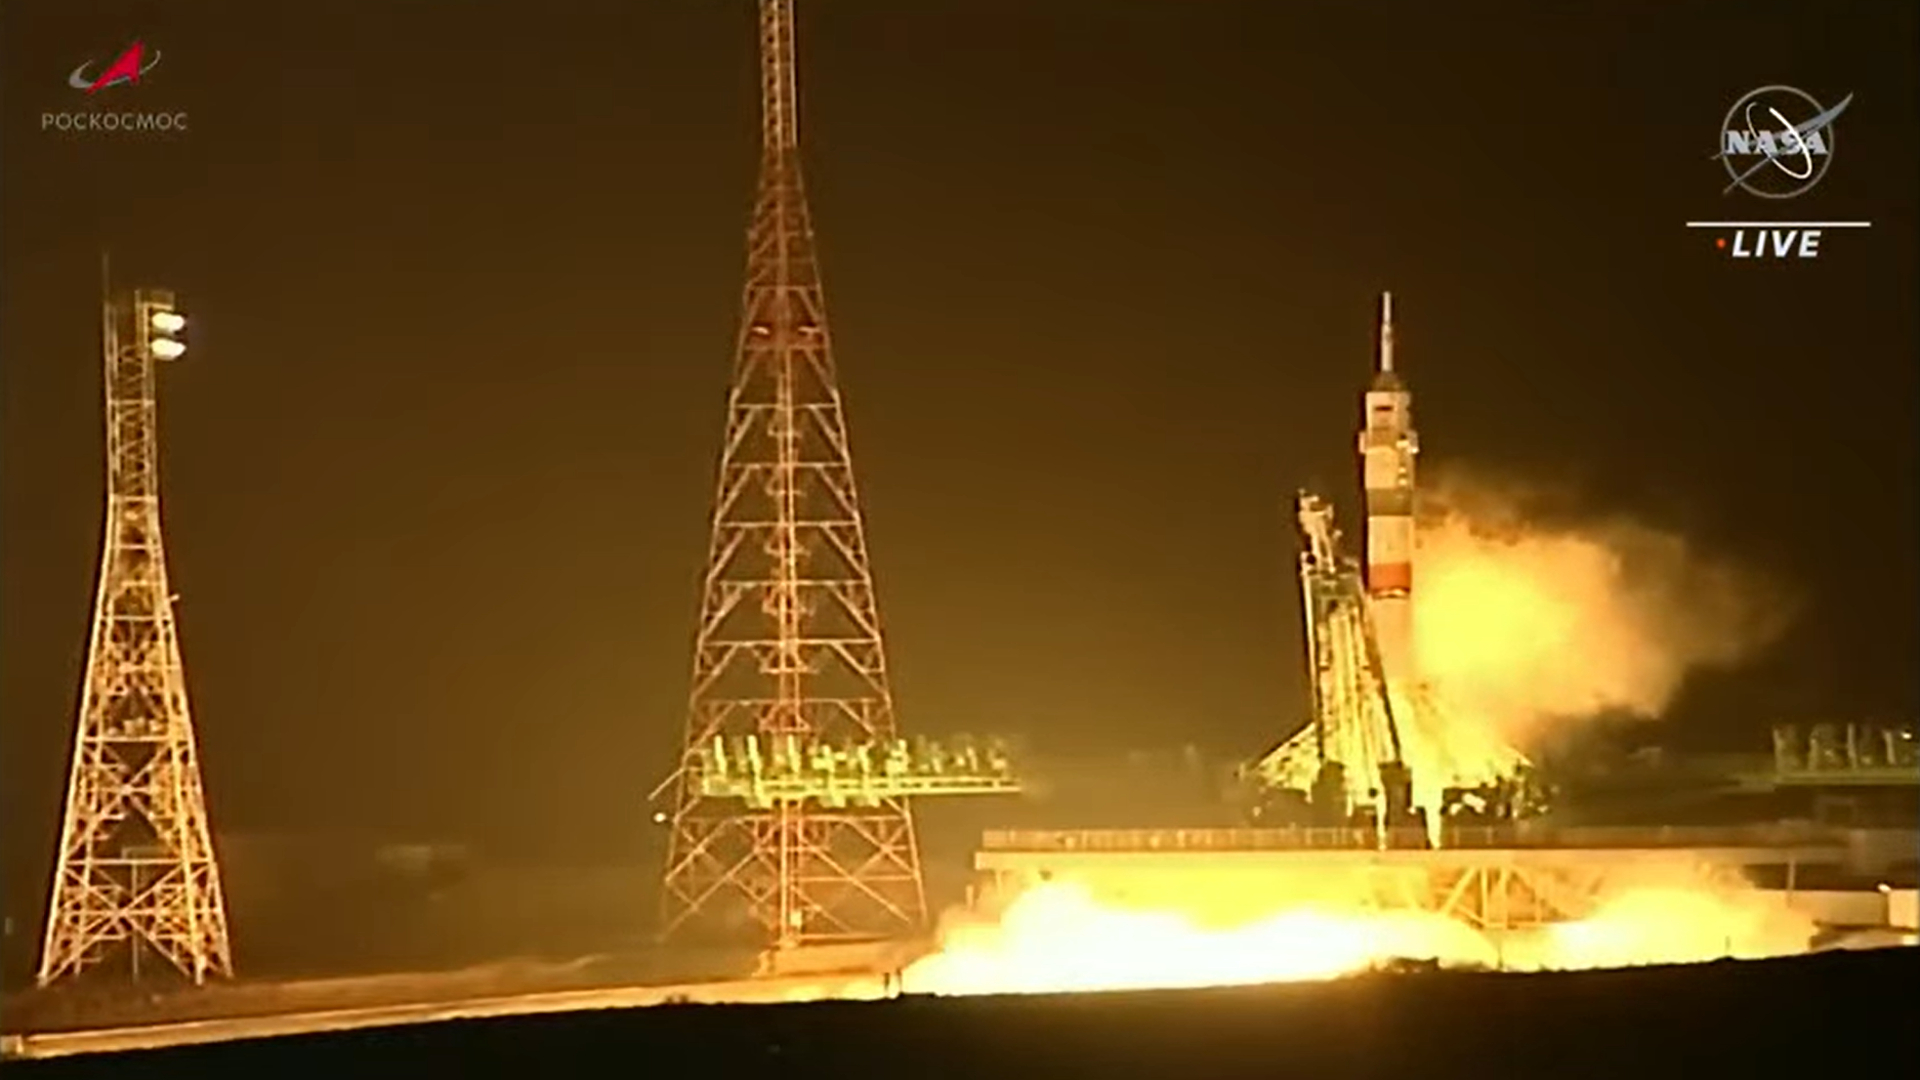 Russia launches Soyuz capsule without crew to replace leaky spaceship at space station